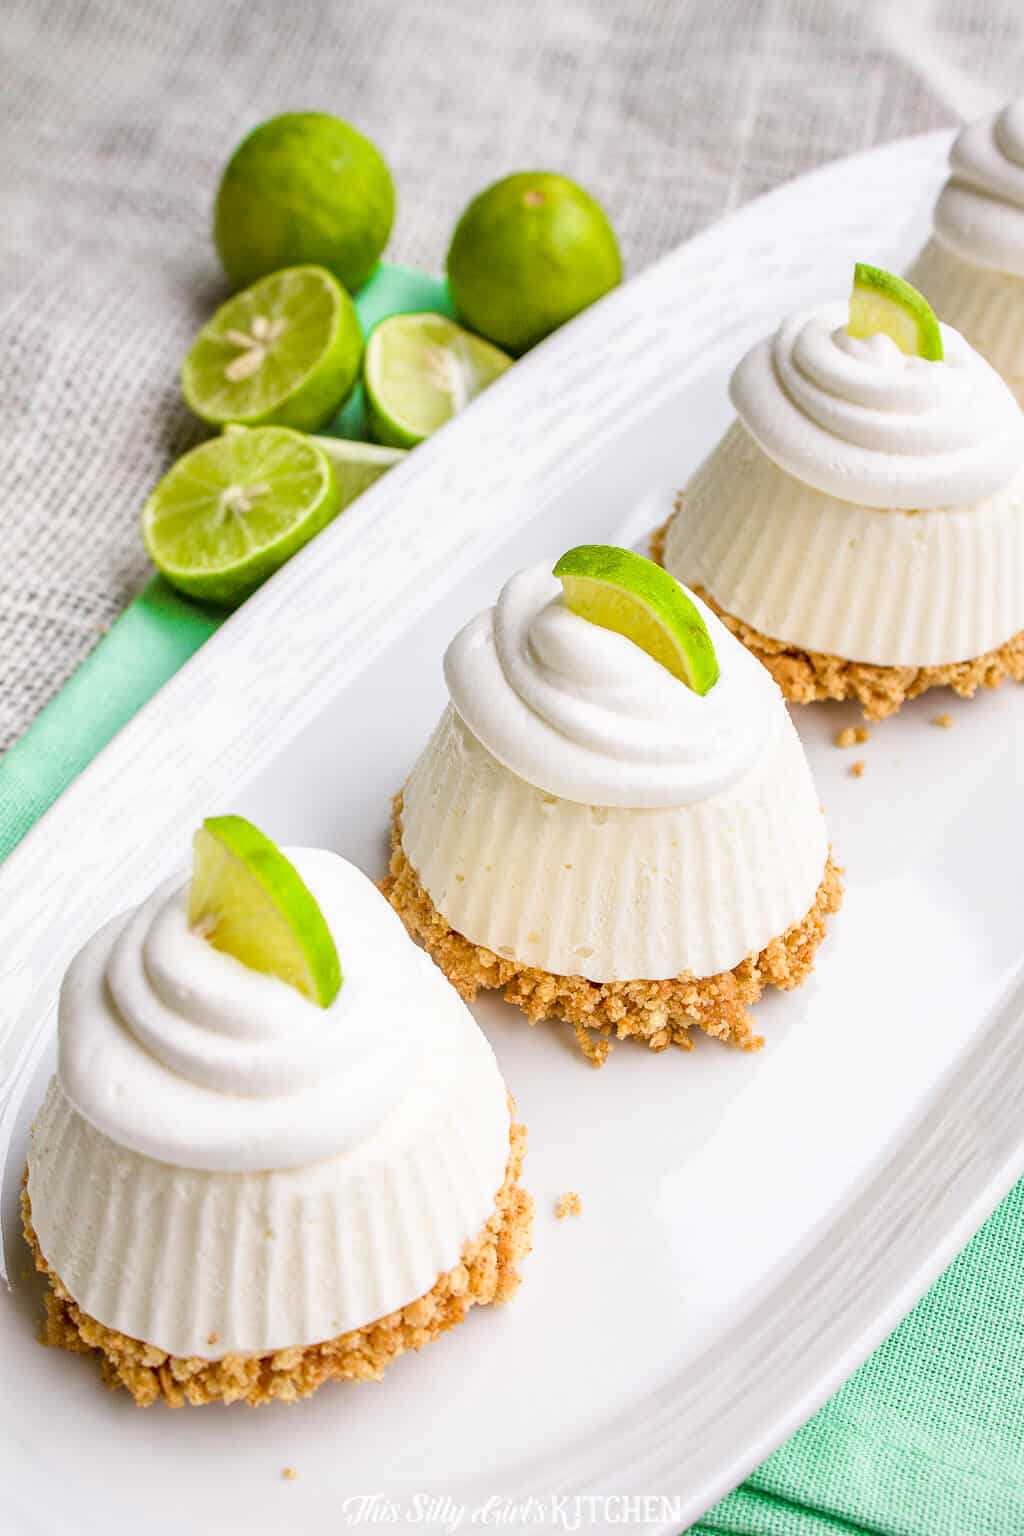 Overhead of Key Lime Pie on white plate topped with whipped topping and limes